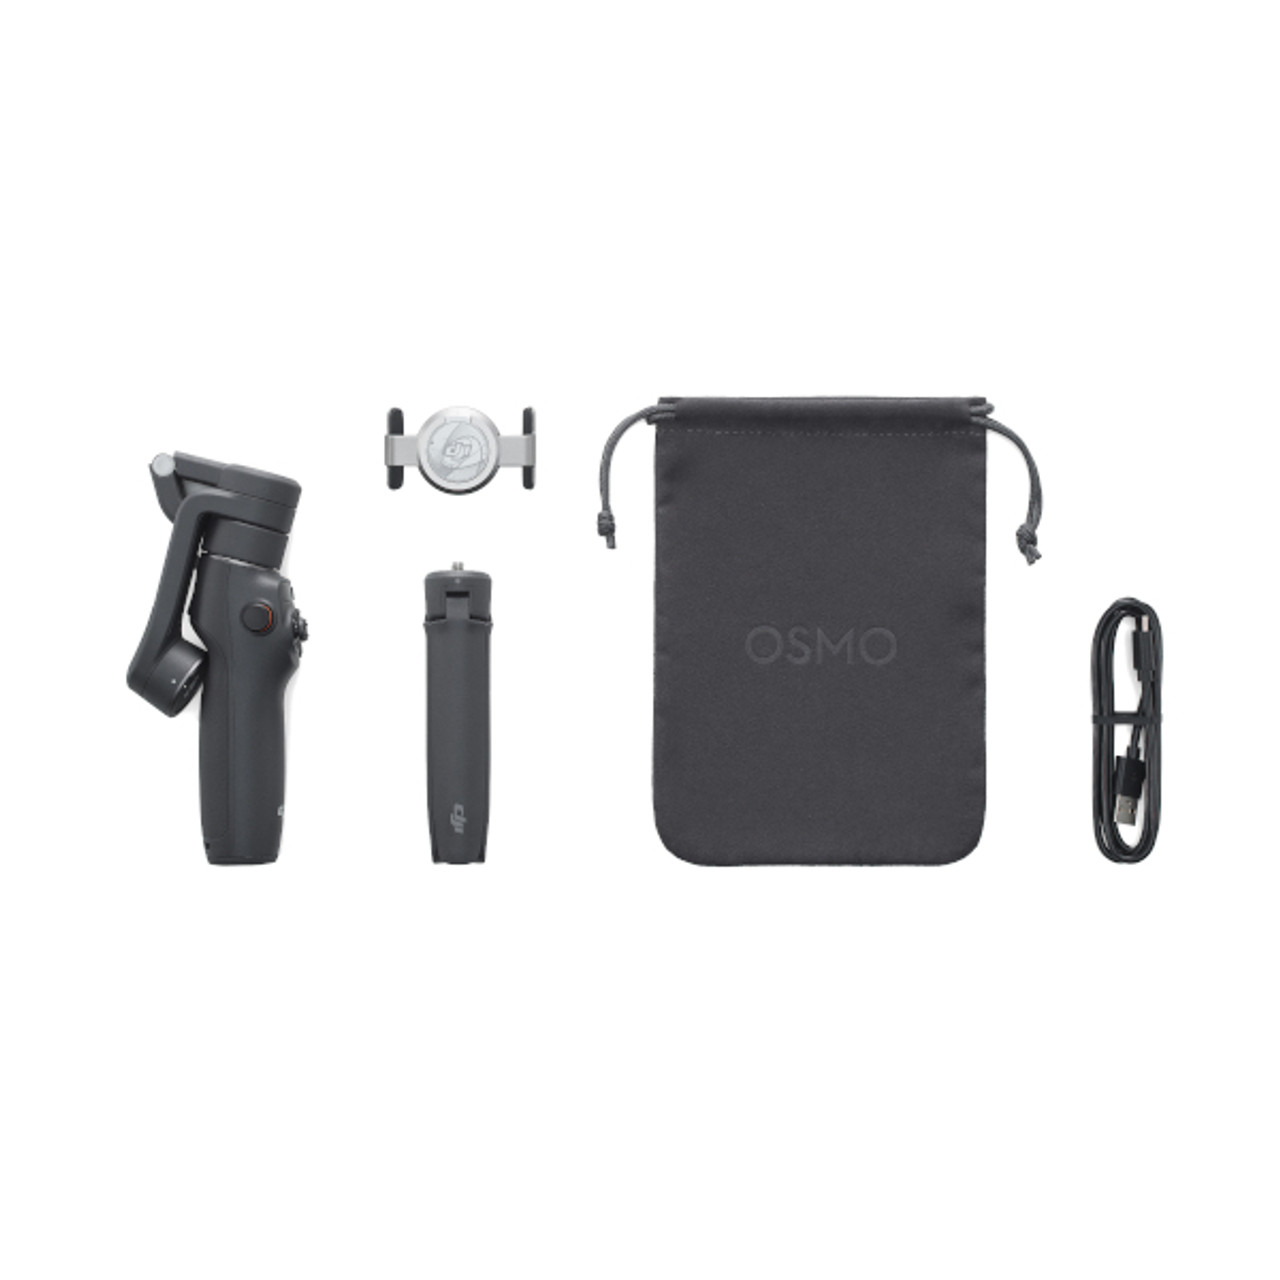 DJI Osmo Mobile 6 Gimbal Stabilizer for Smartphones, 3-Axis Phone Gimbal,  Built-In Extension Rod, Object Tracking, Portable and Foldable, Vlogging